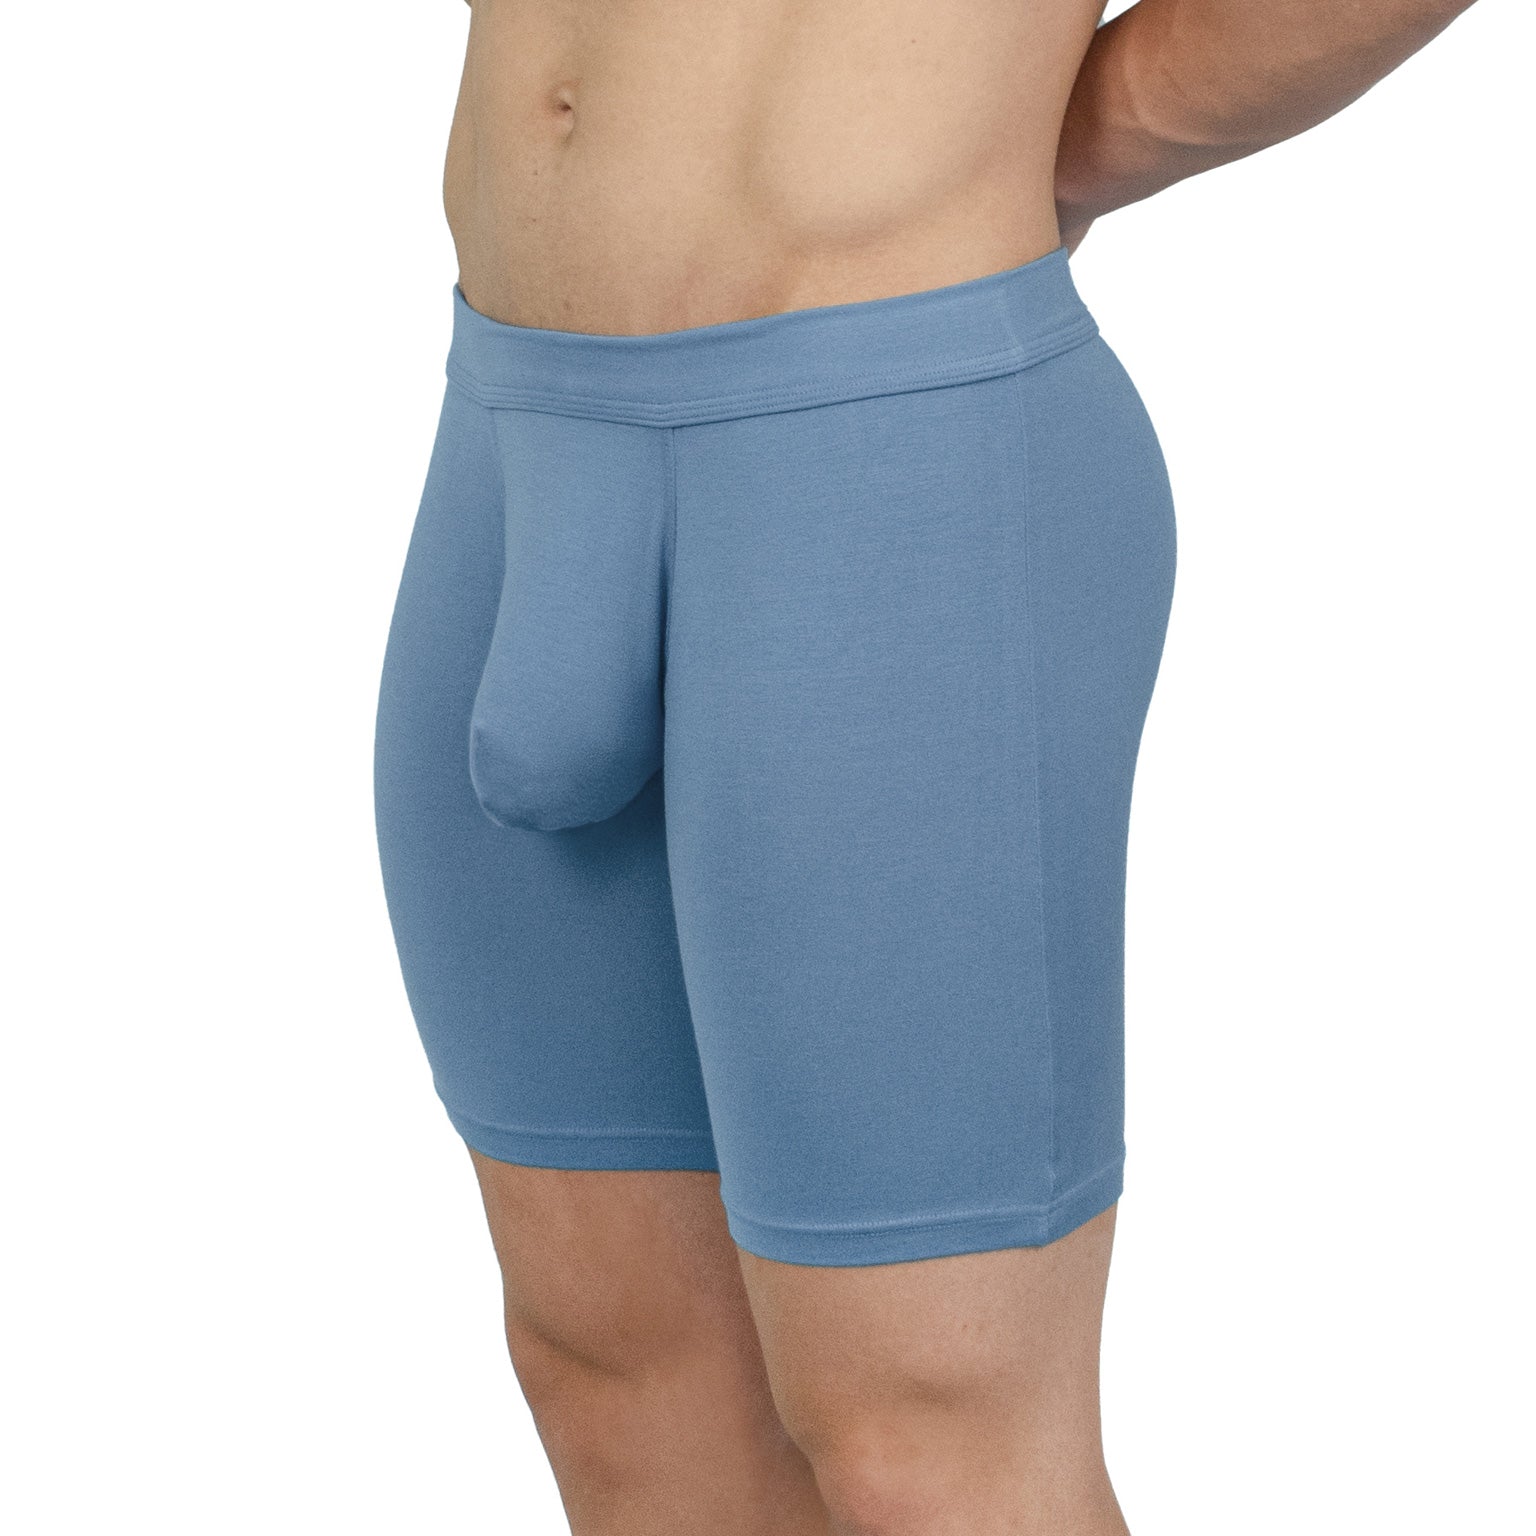 New boxers Bloxers to protect men's modesty in case they become